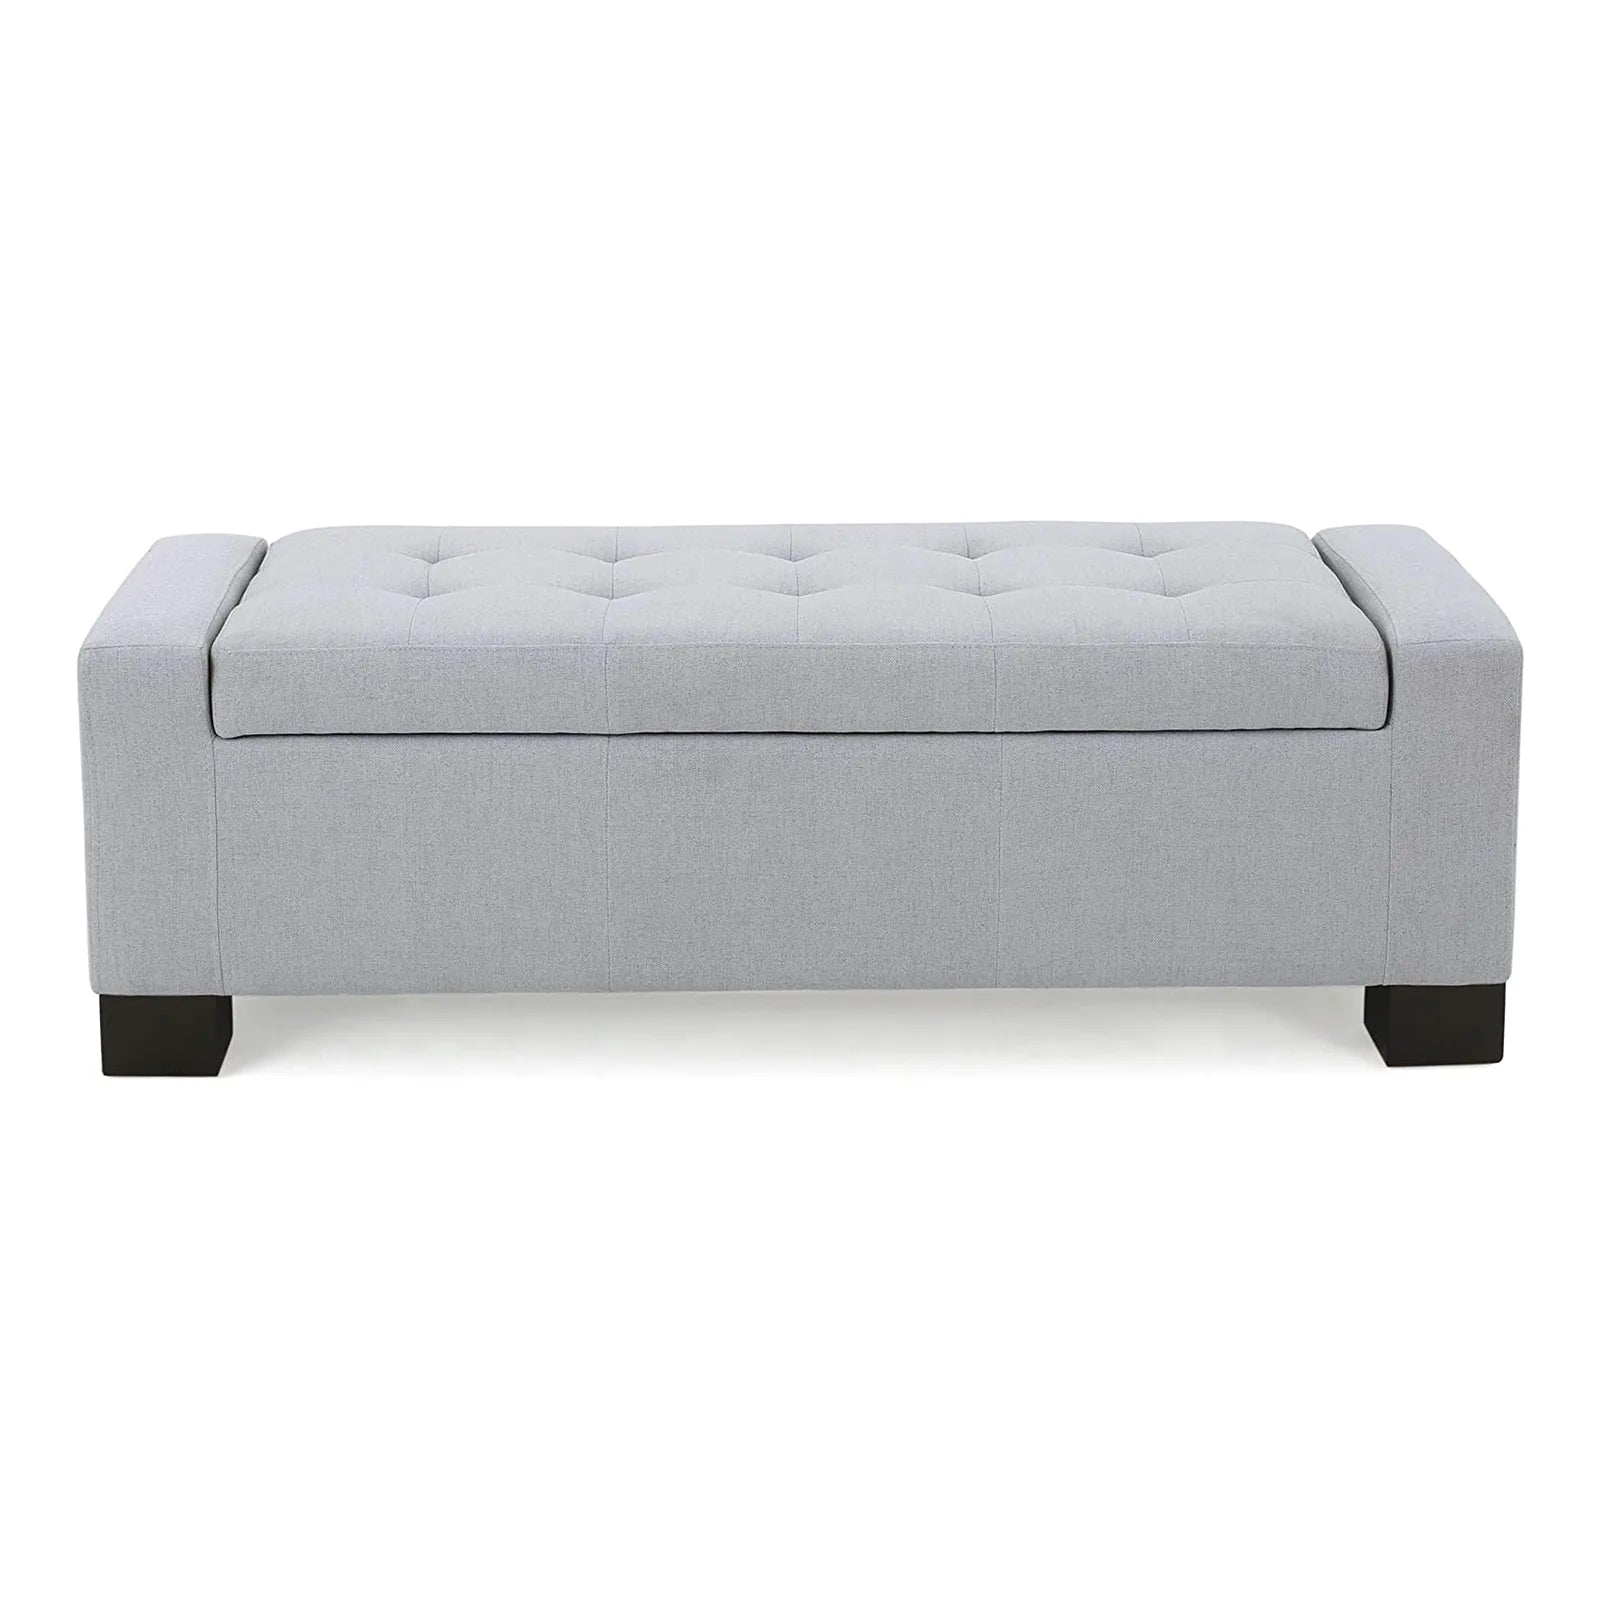 Button Tufted Upholstered Lift Up Storage Ottoman and Bench